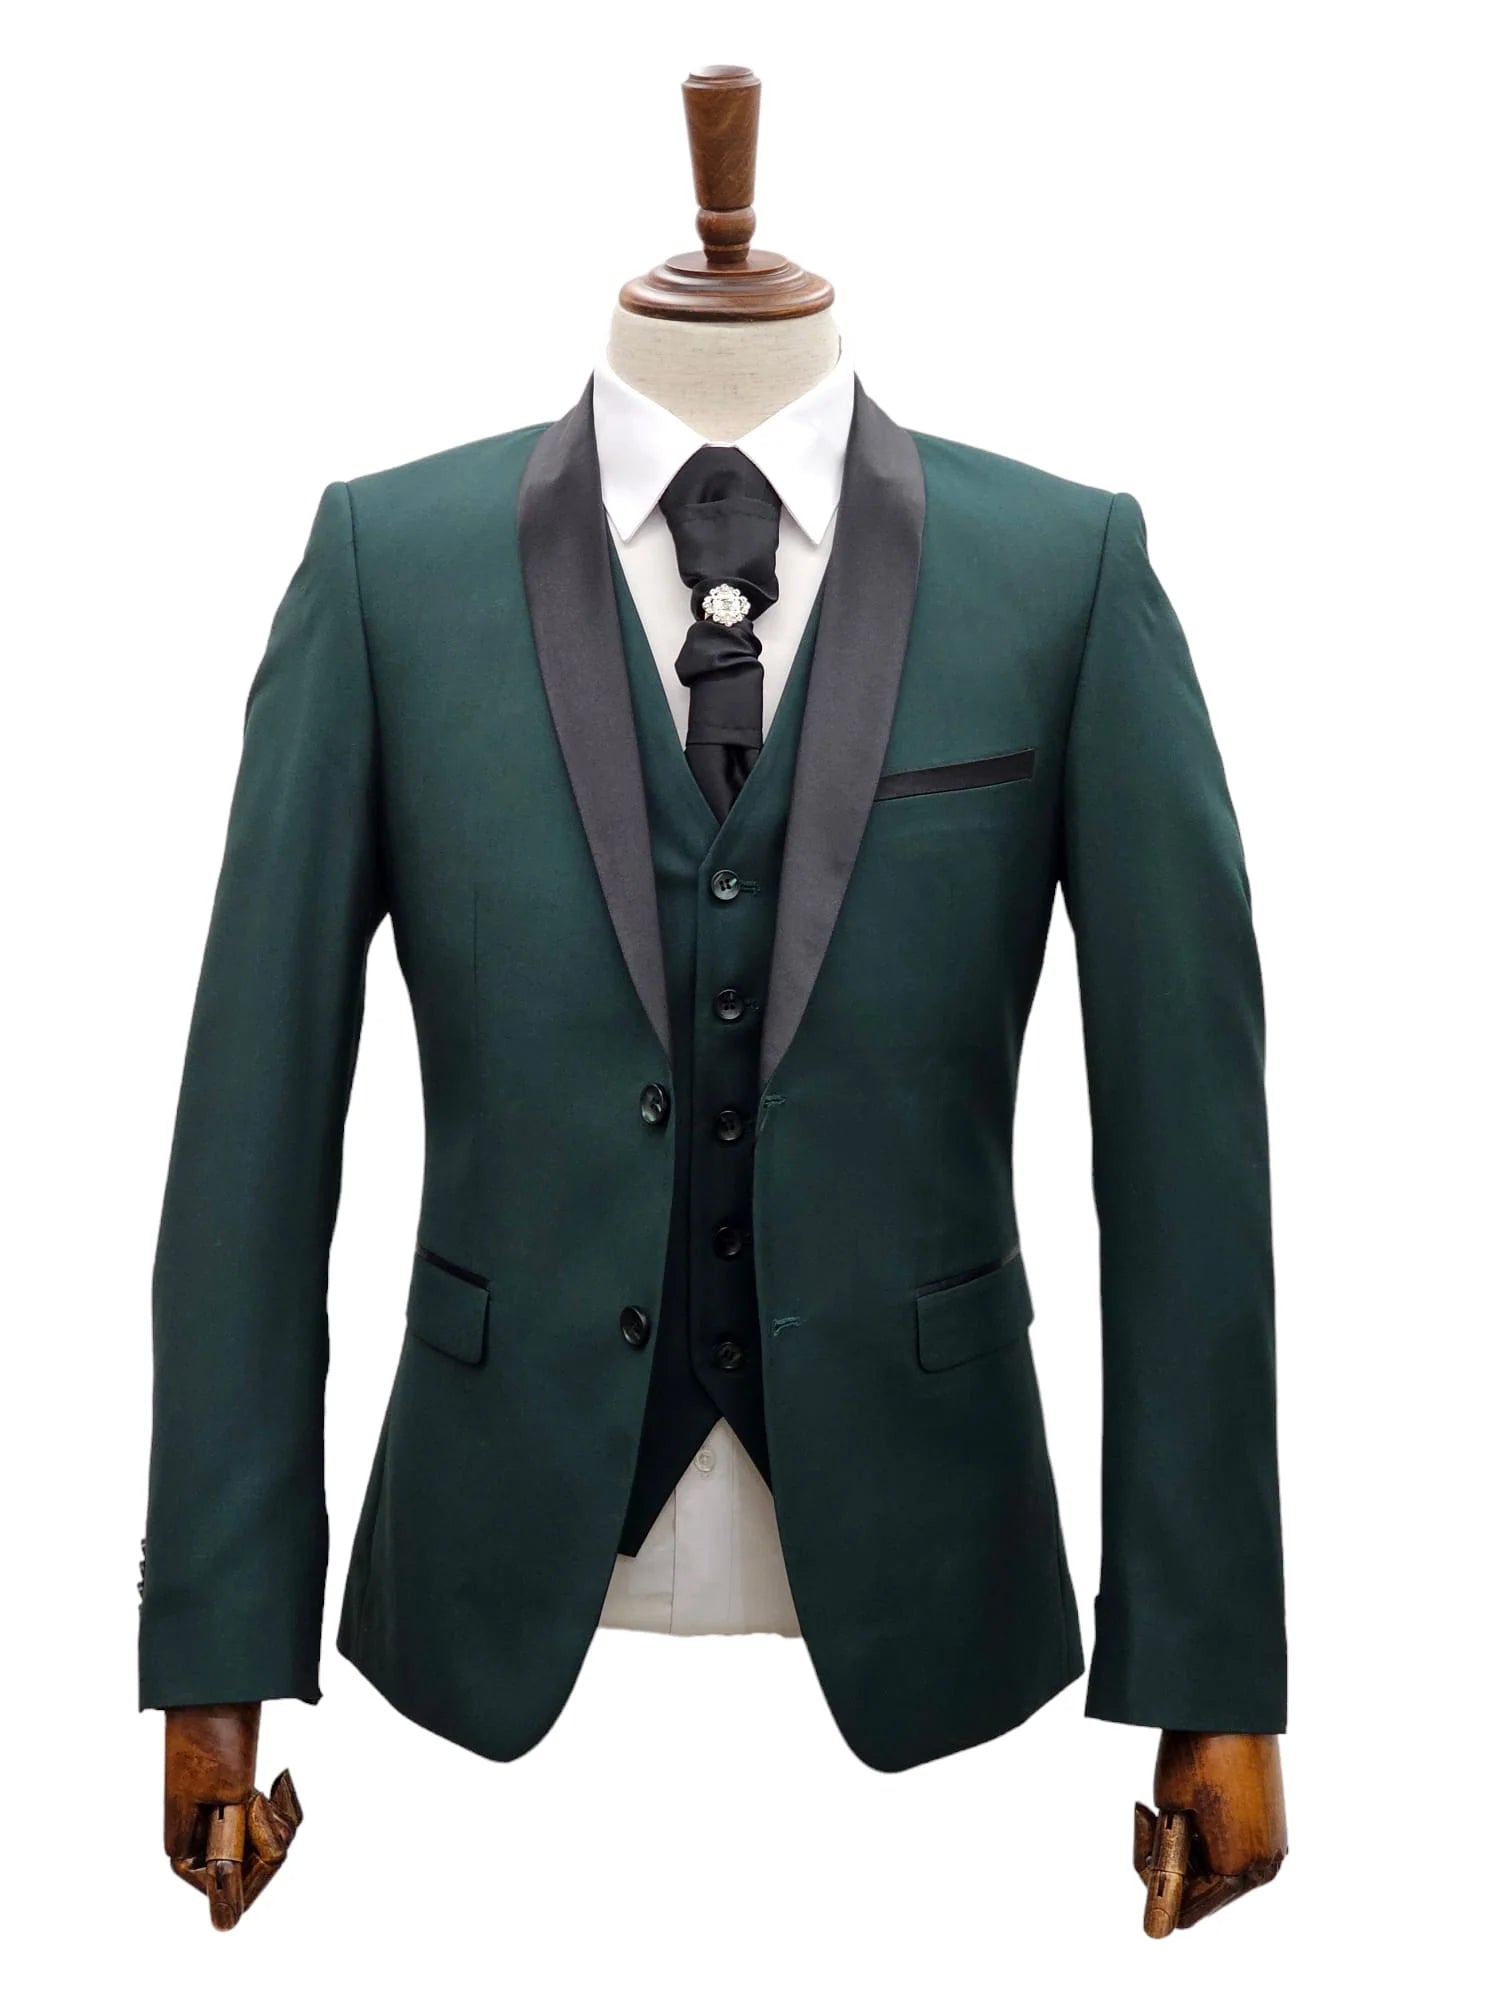 KCT Menswear hunter green tuxedo jacket, a symbol of sophisticated elegance for formal occasions.